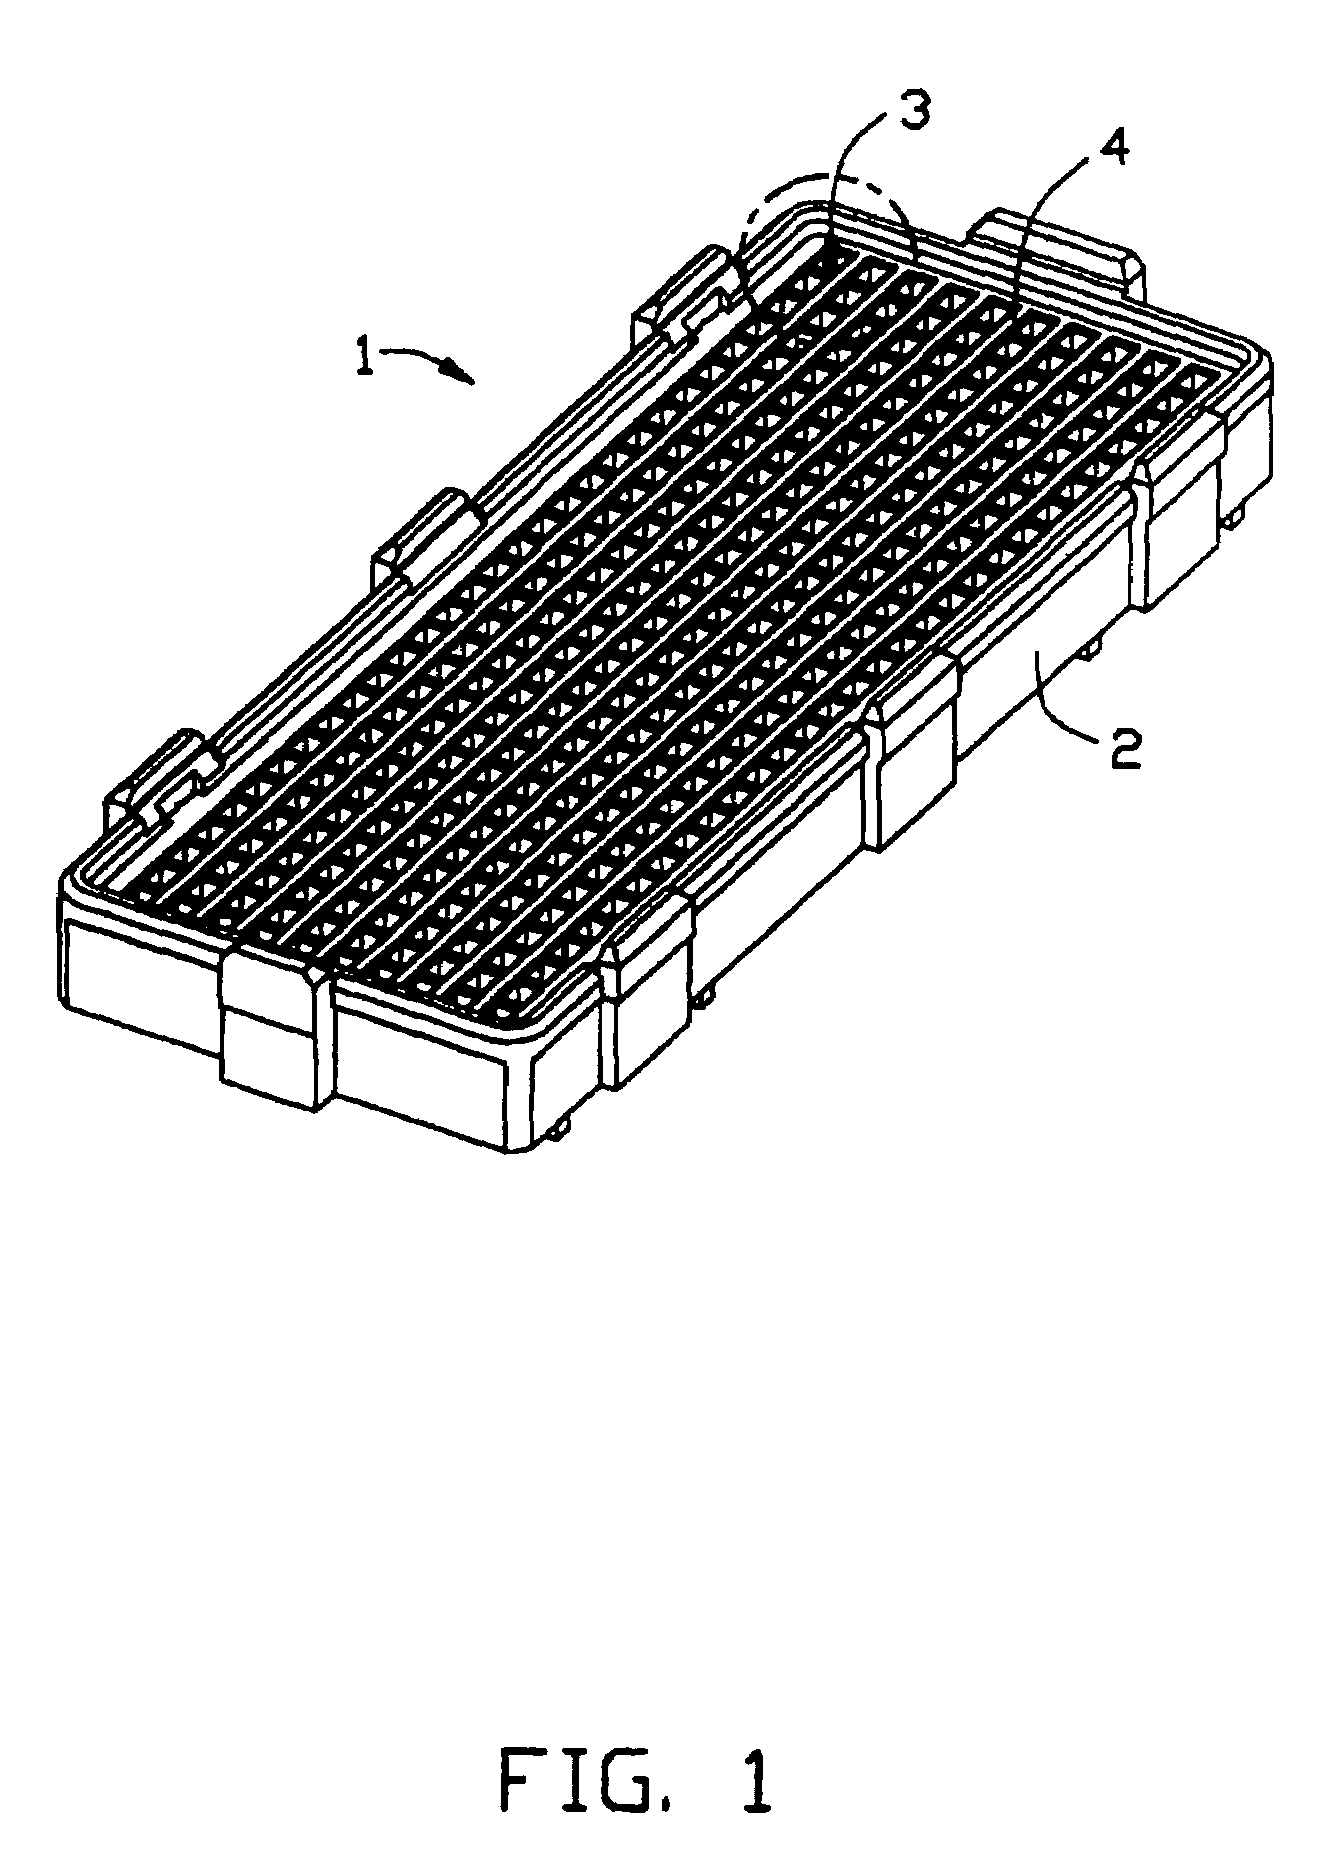 High density connector with enhanced structure